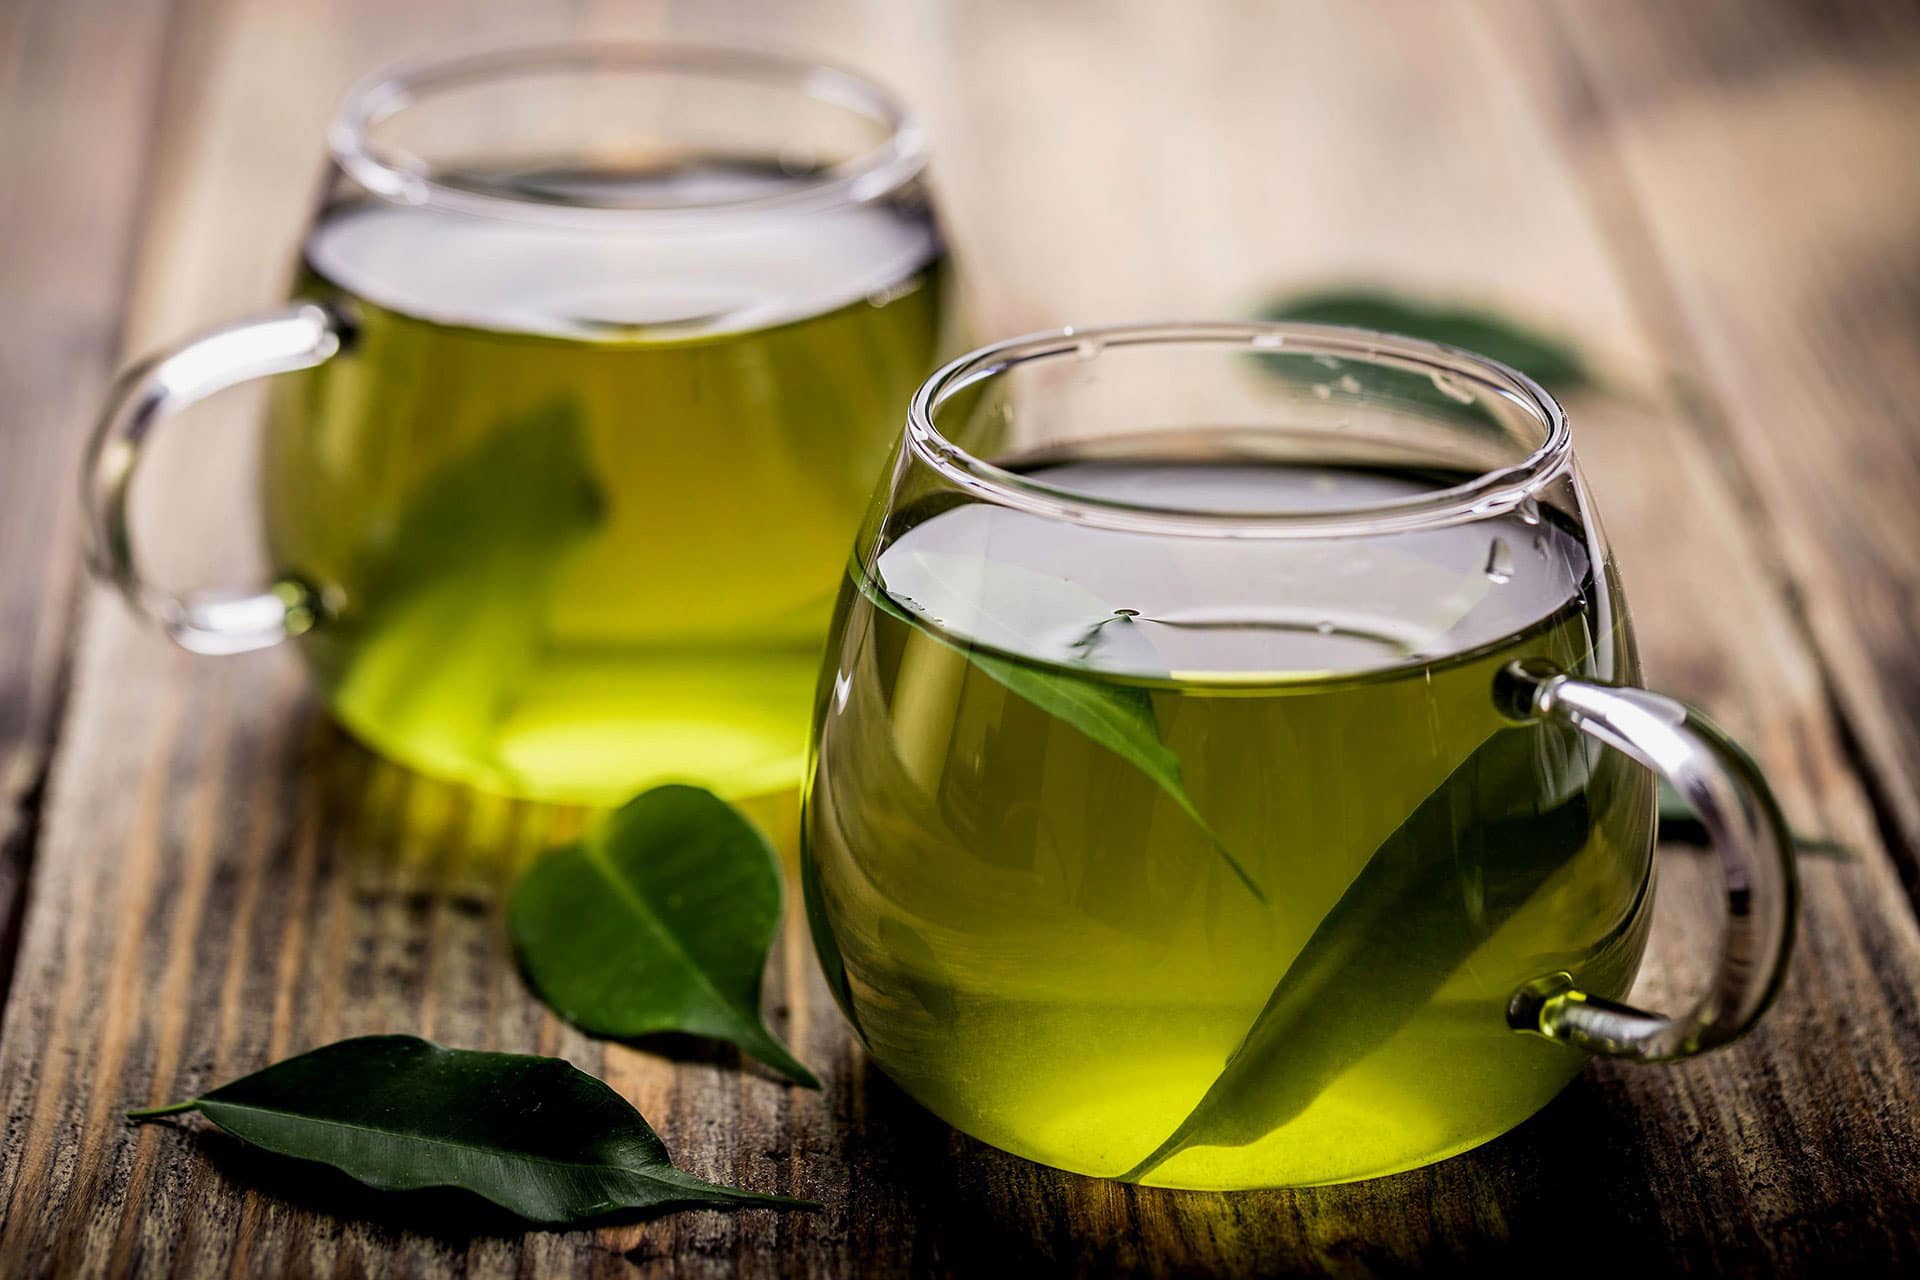 Drinking green tea could lead to longer life, study